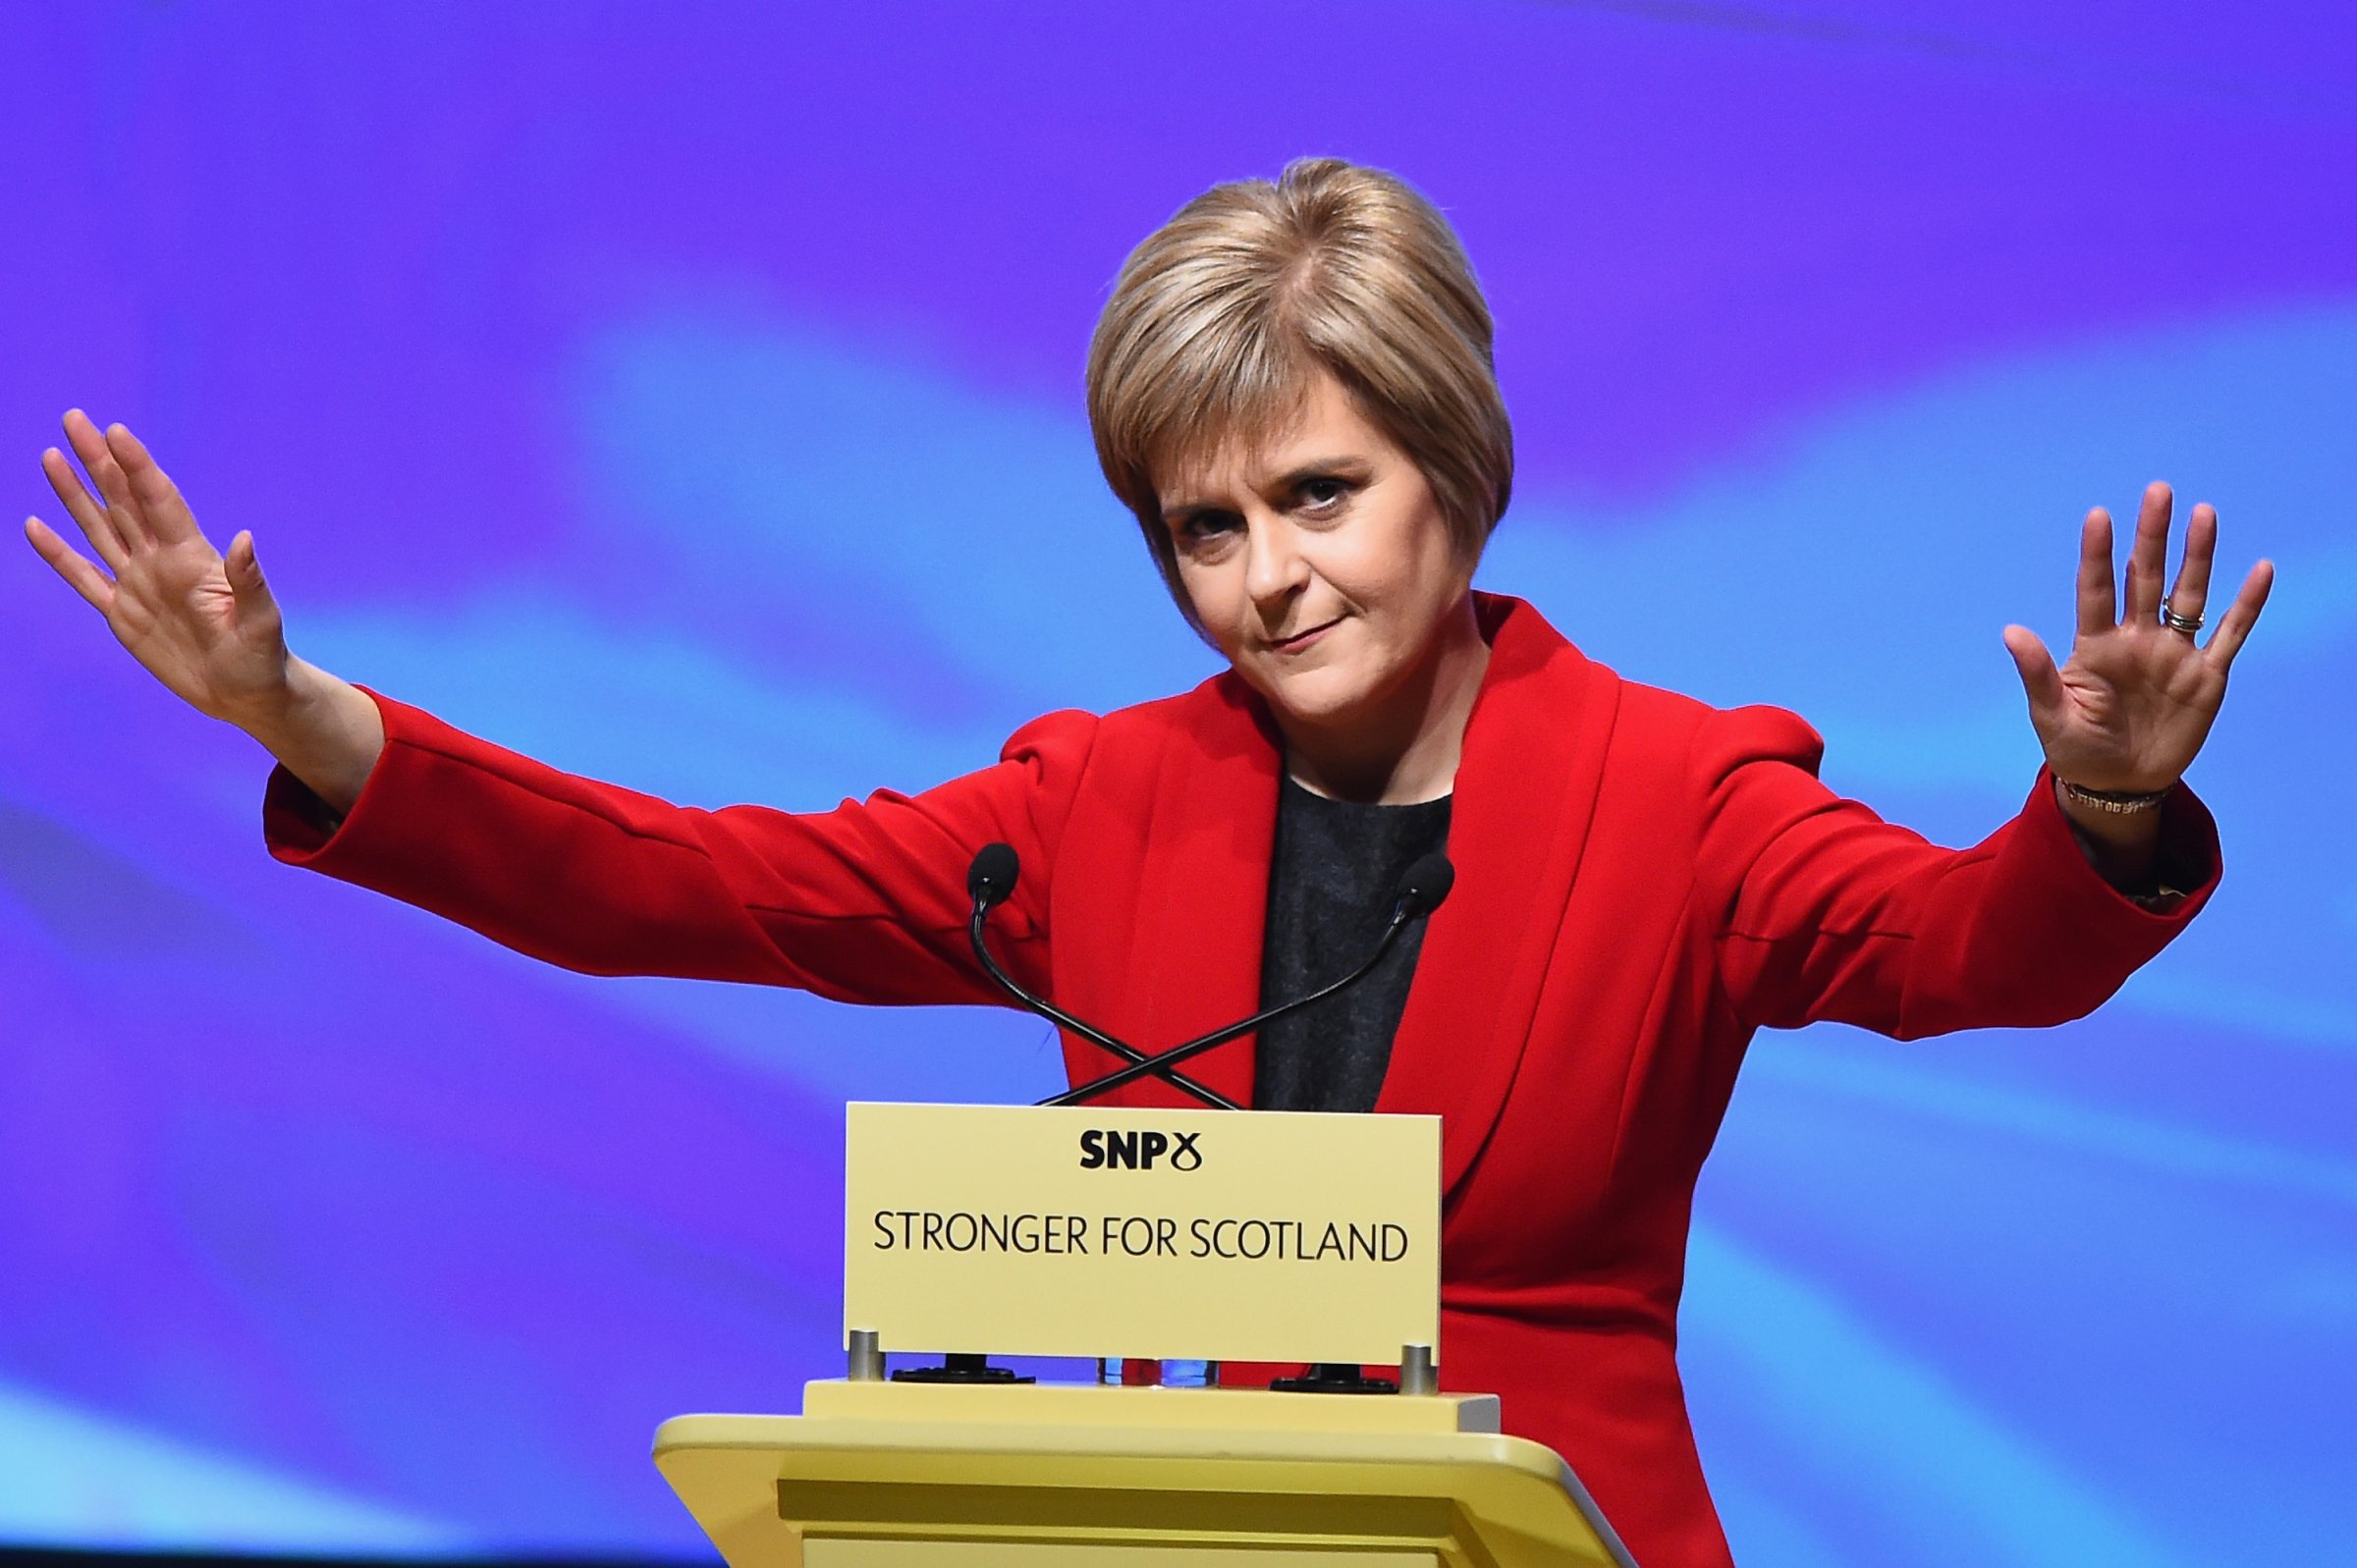 Nicola Sturgeon, gives her first key note speech as SNP party leader at the partys annual conference on November 15, 2014 in Perth, Scotland.